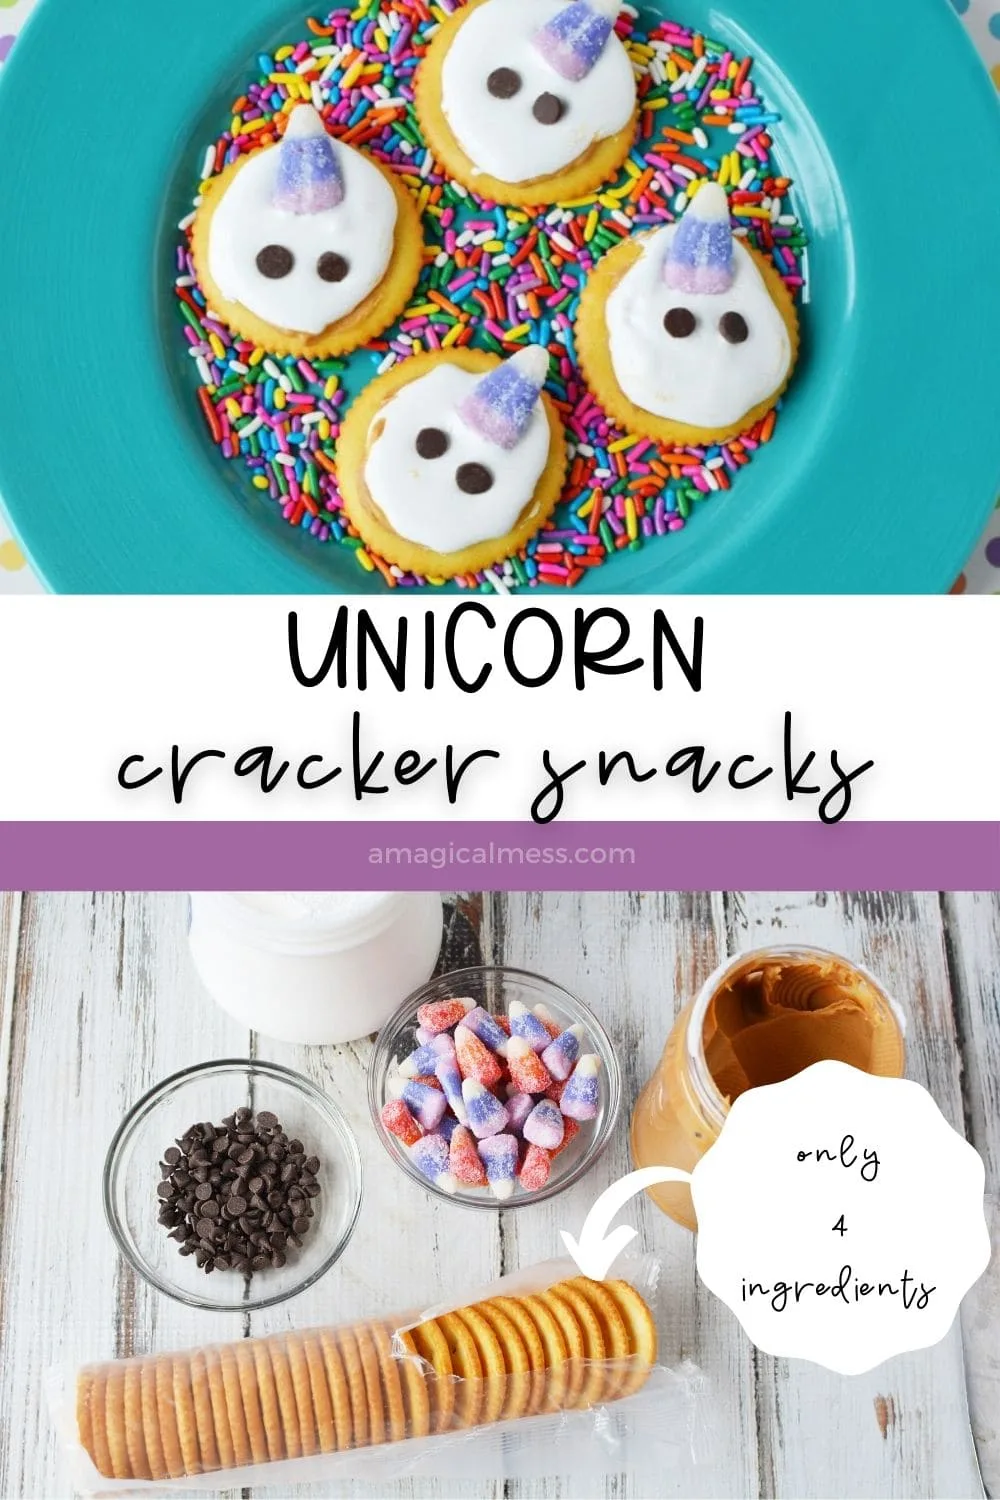 plate of unicorn crackers and ingredients